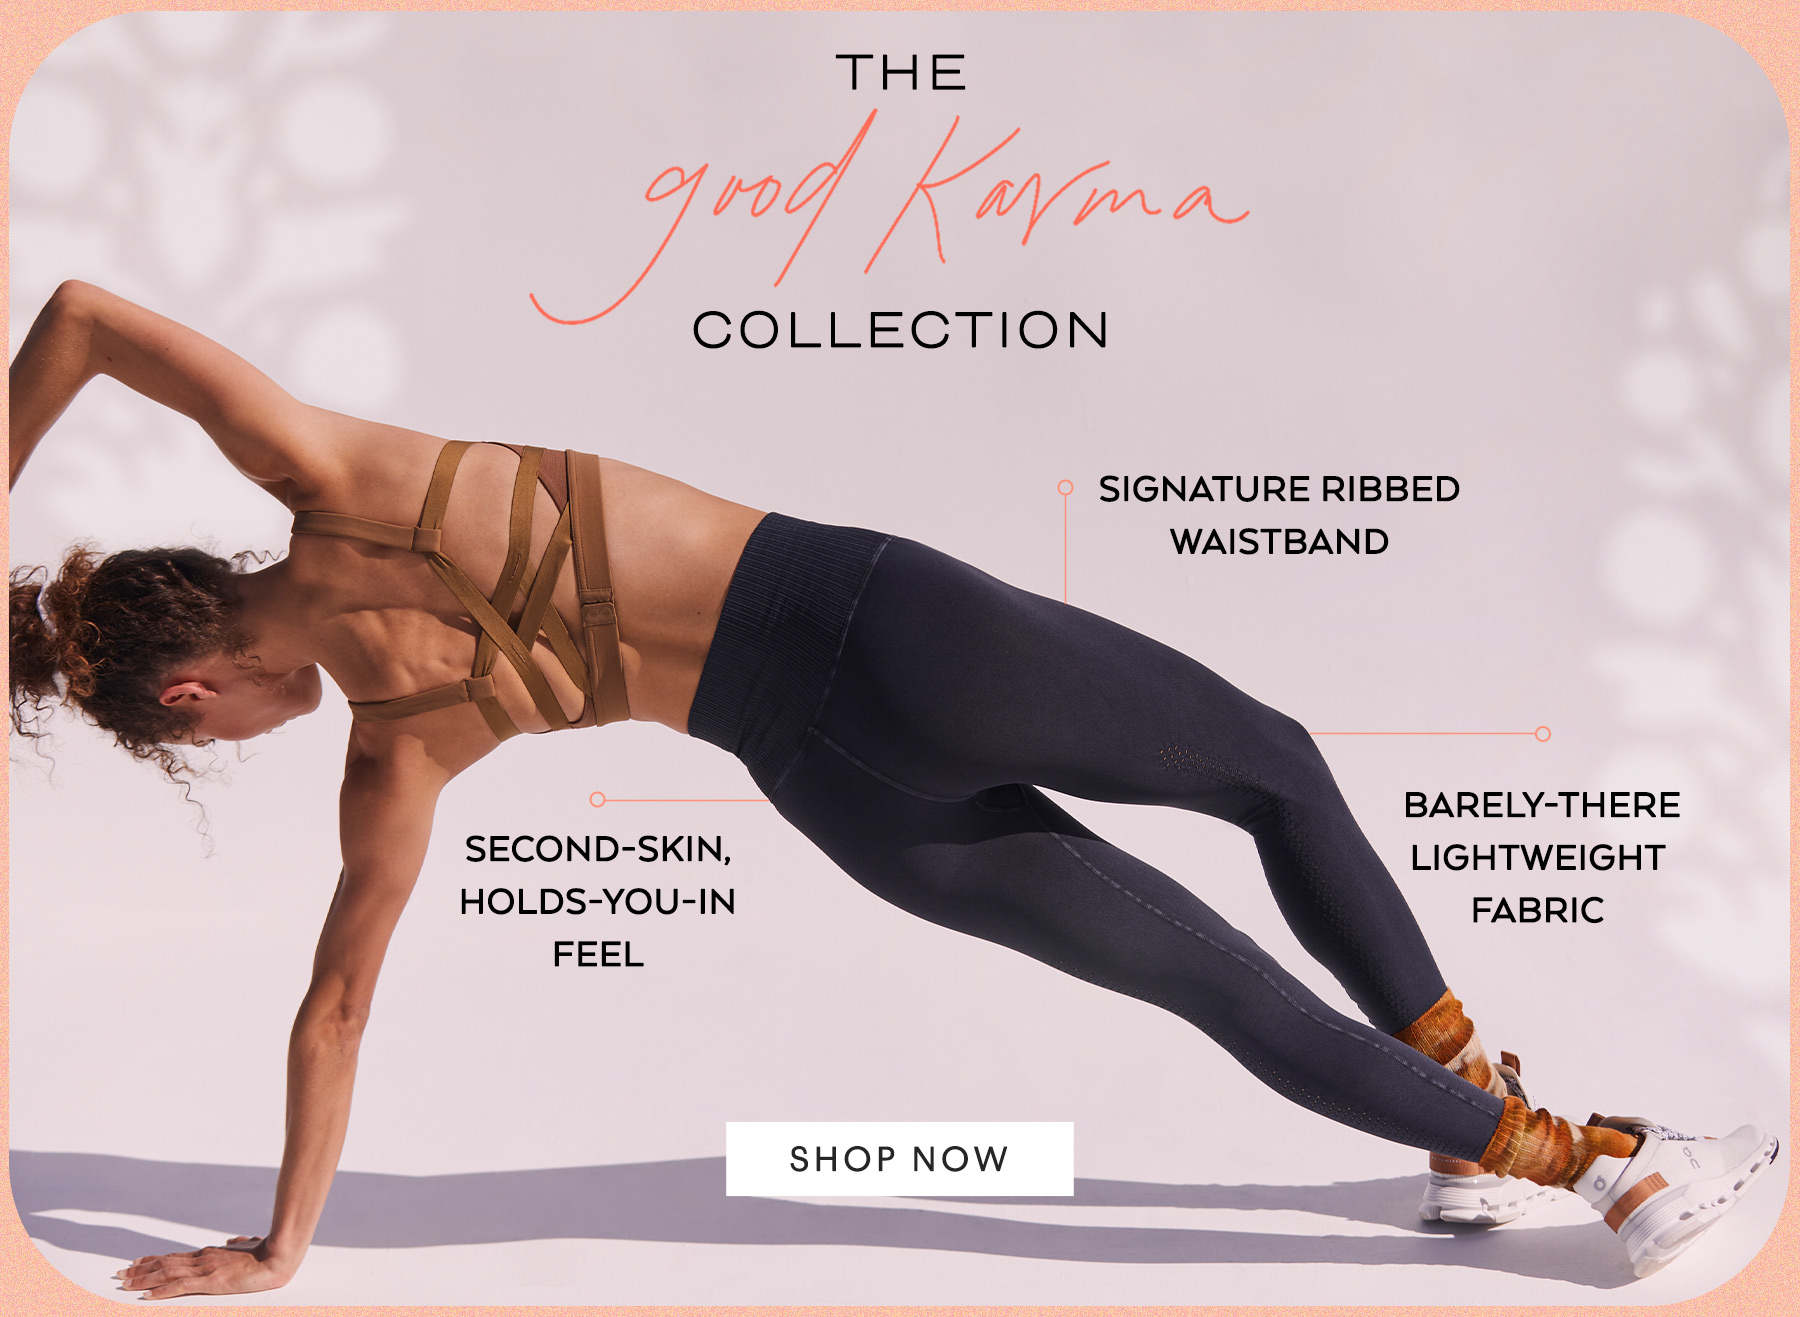 Free People FP Movement Good Karma Tie-Dye Leggings, $88, 12 Printed  Leggings to Help You Make a Statement at the Gym - (Page 9)